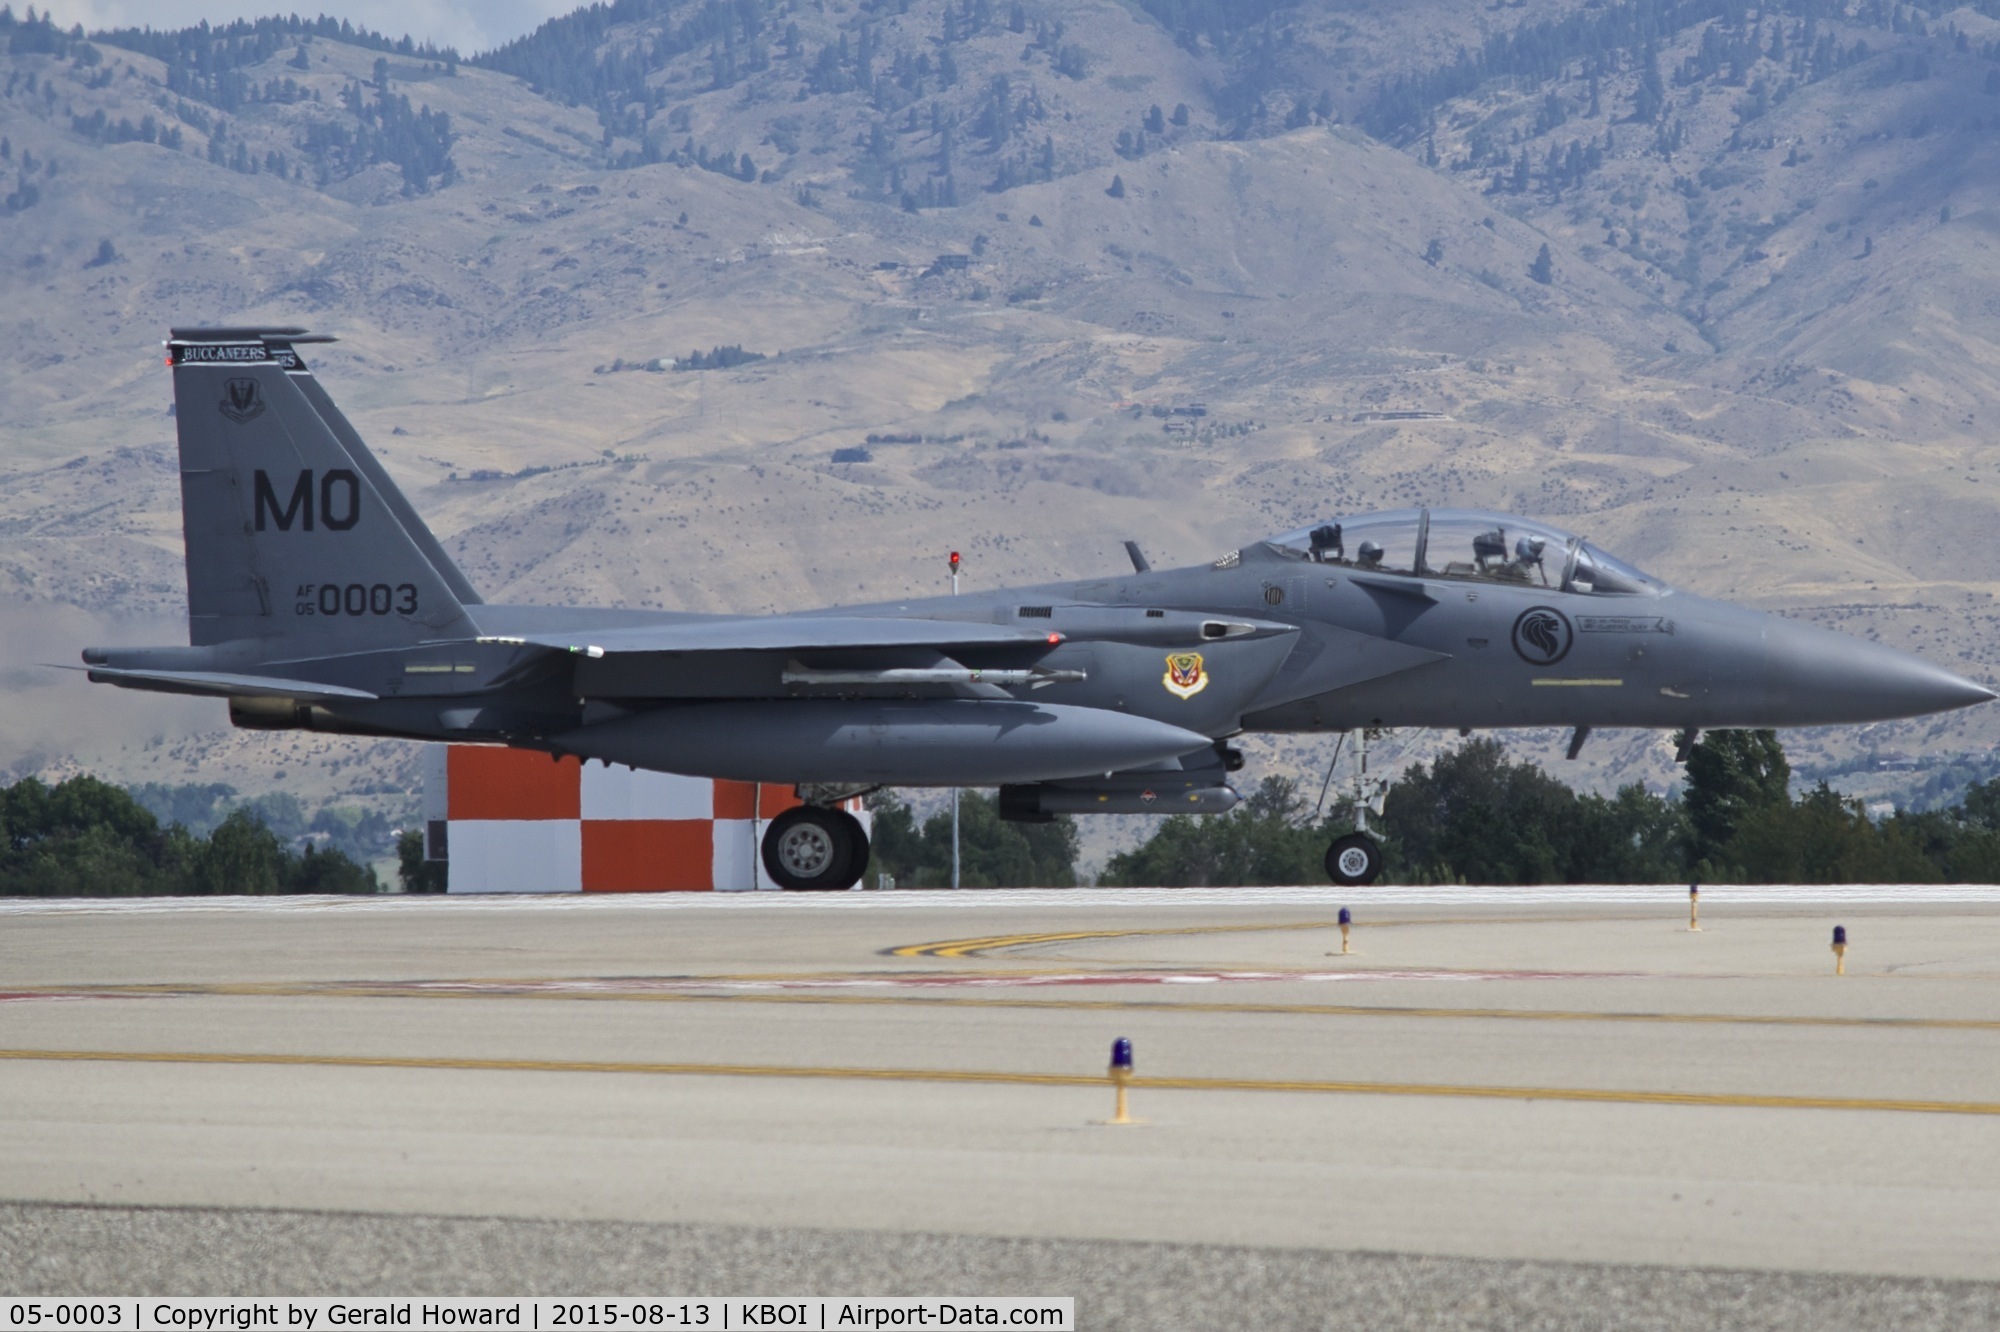 05-0003, 2005 Boeing F-15SG Strike Eagle C/N SG3, Starting take off roll on RWY 10R. 428th Fighter Sq., 366th Fighter Wing, Mountain Home AFB, Idaho.